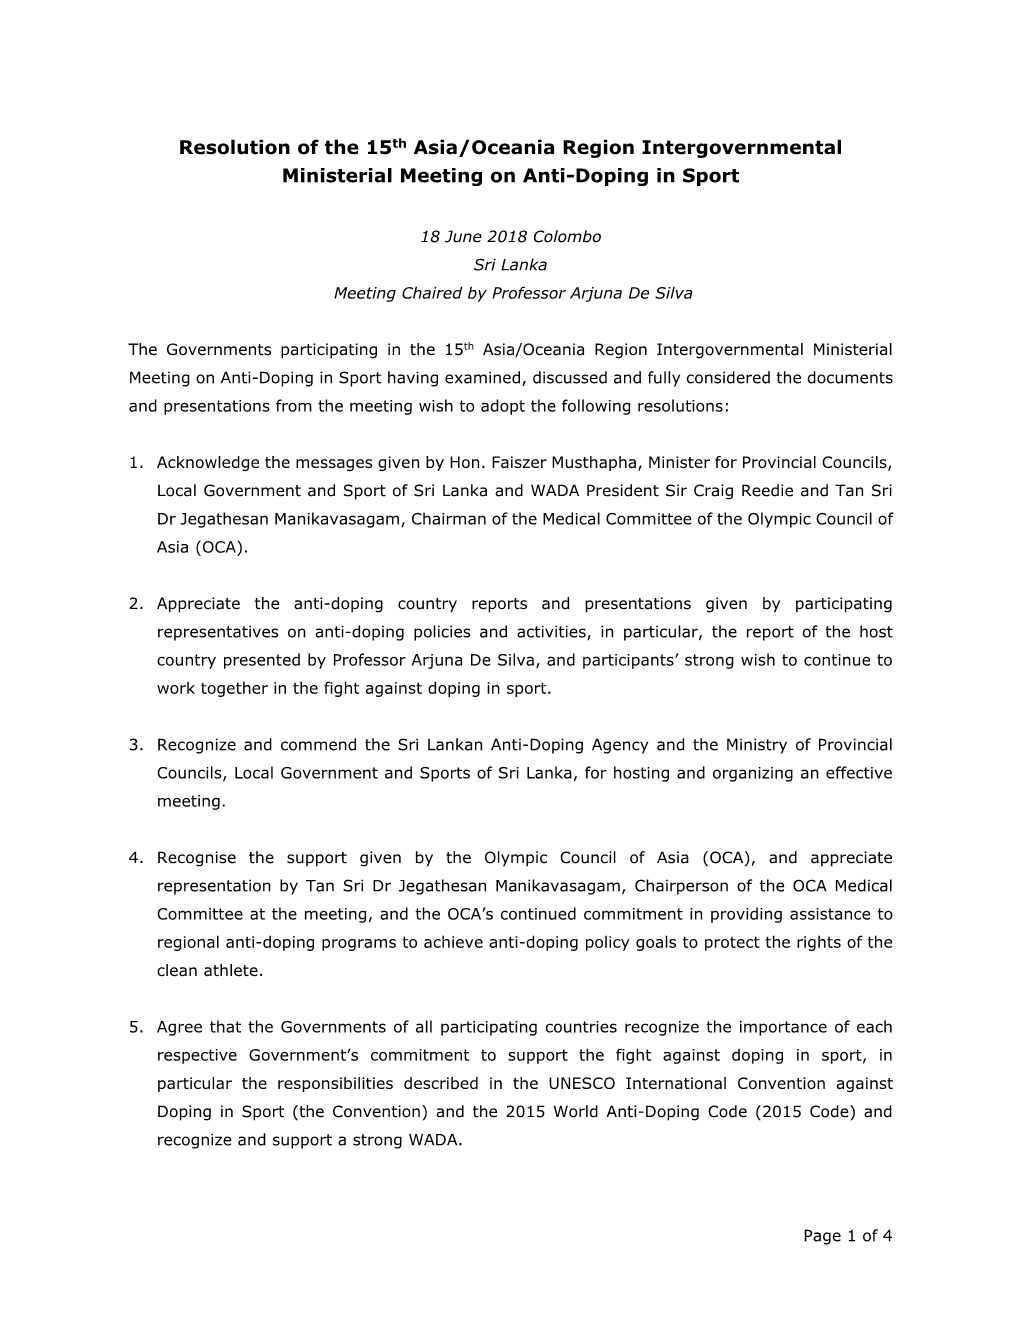 Resolution of the 15Th Asia/Oceania Region Intergovernmental Ministerial Meeting on Anti-Doping in Sport